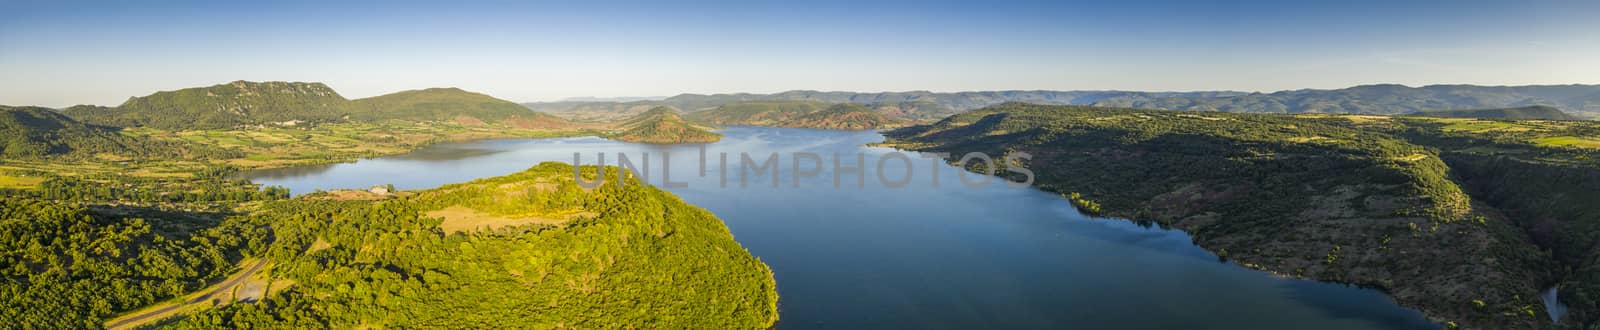 Lac du Salagou is an artificial lake located in the south of France, in the Hérault department in the Occitanie region